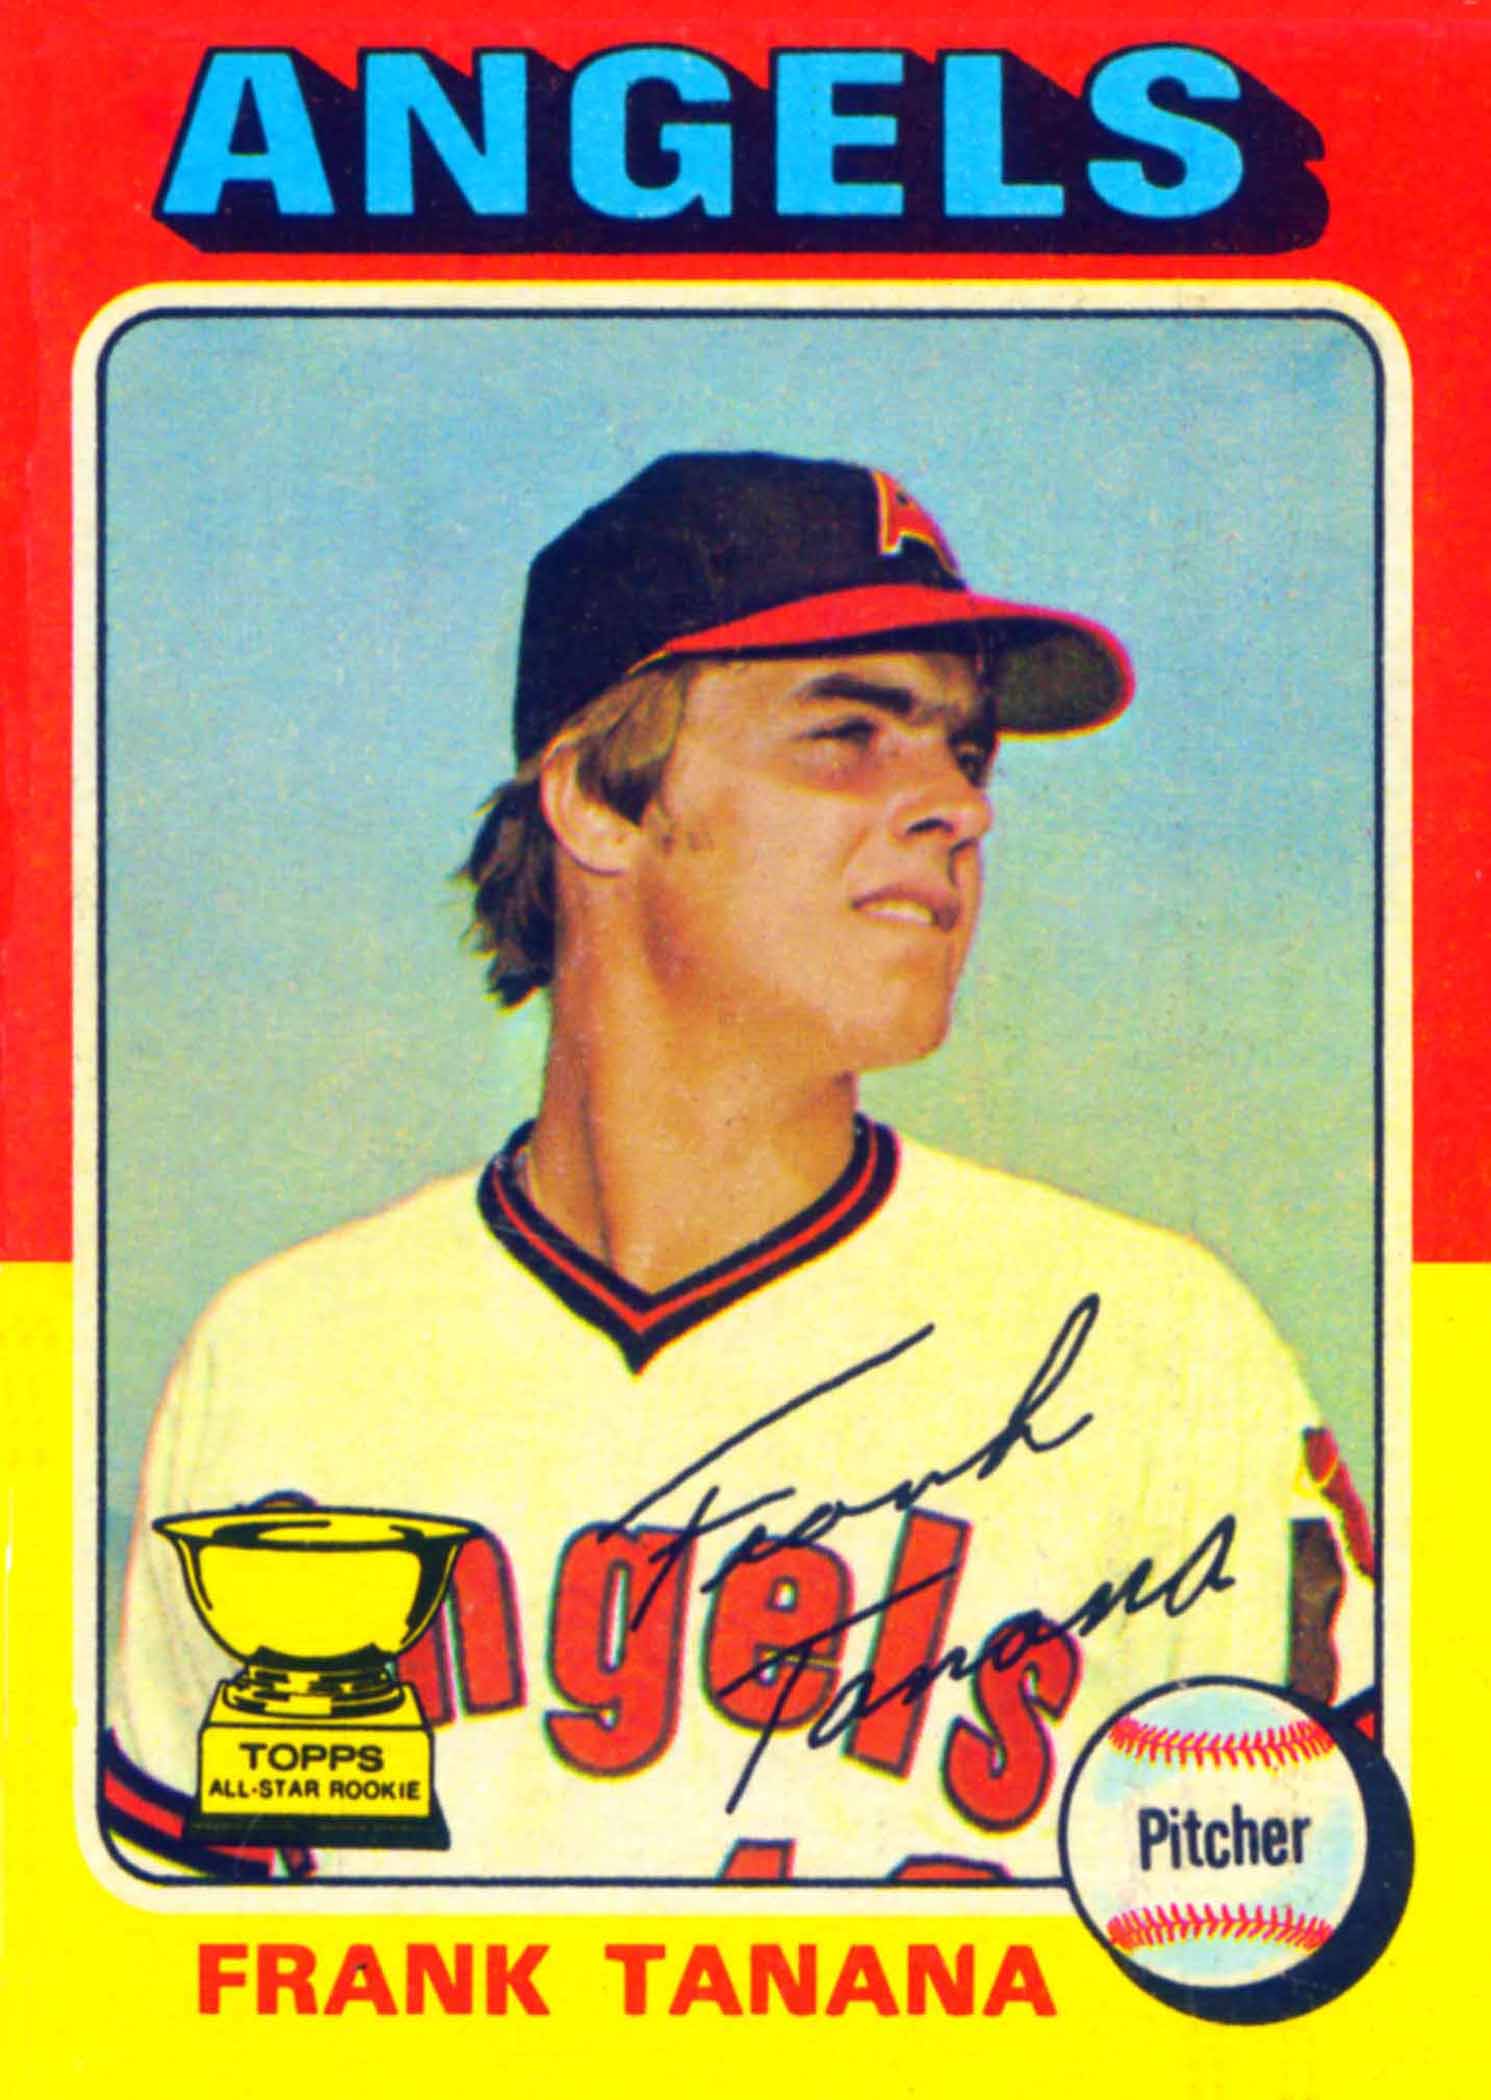 Frank Tanana: 3x All-Star, Led the AL in strikeouts in 1975, in WHIP in  1976, and ERA and ERA+ in 1977 - Italian Americans in Baseball